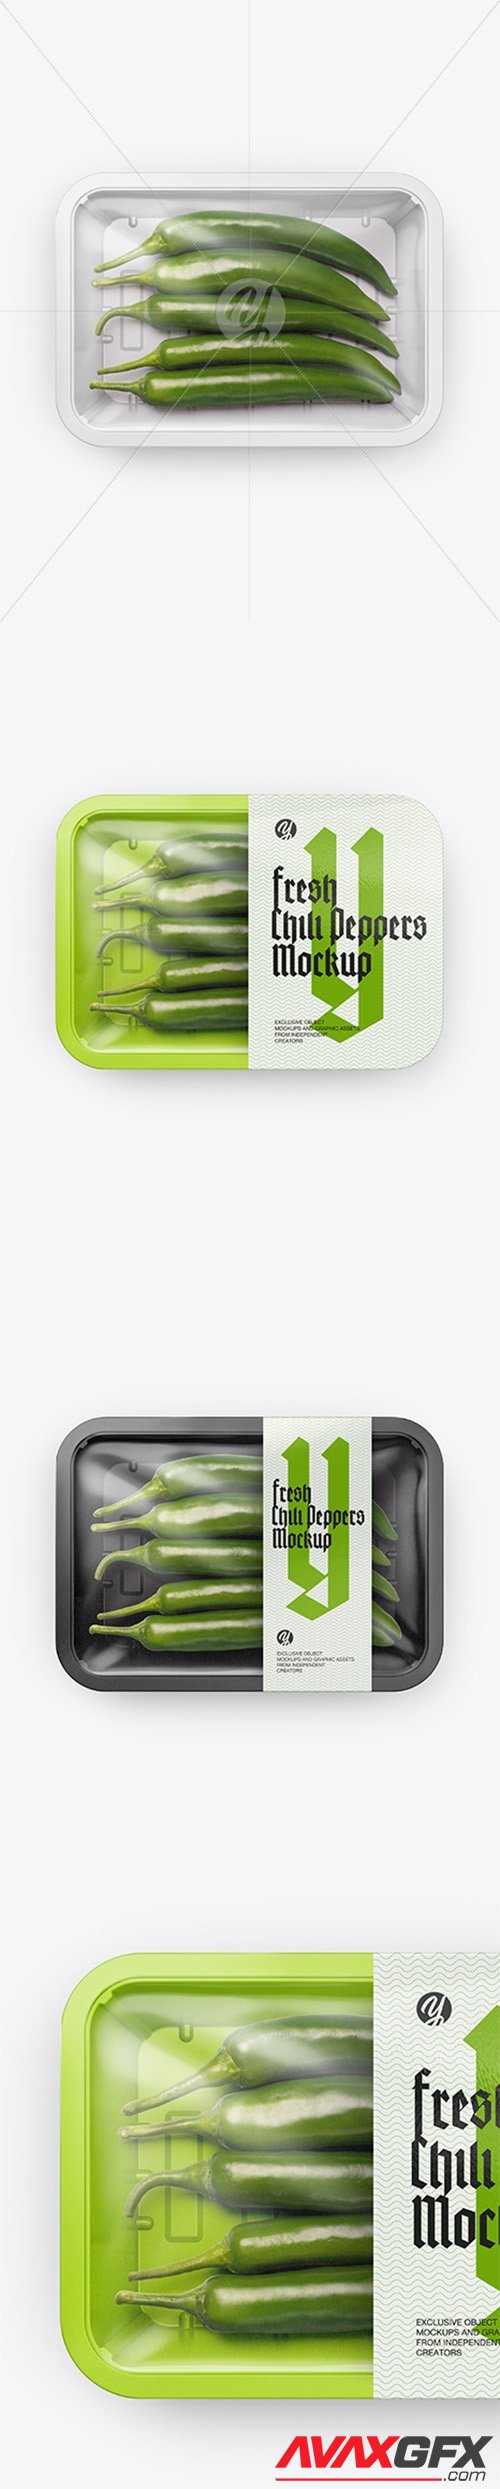 Plastic Tray With Green Chili Peppers Mockup 51867 TIF